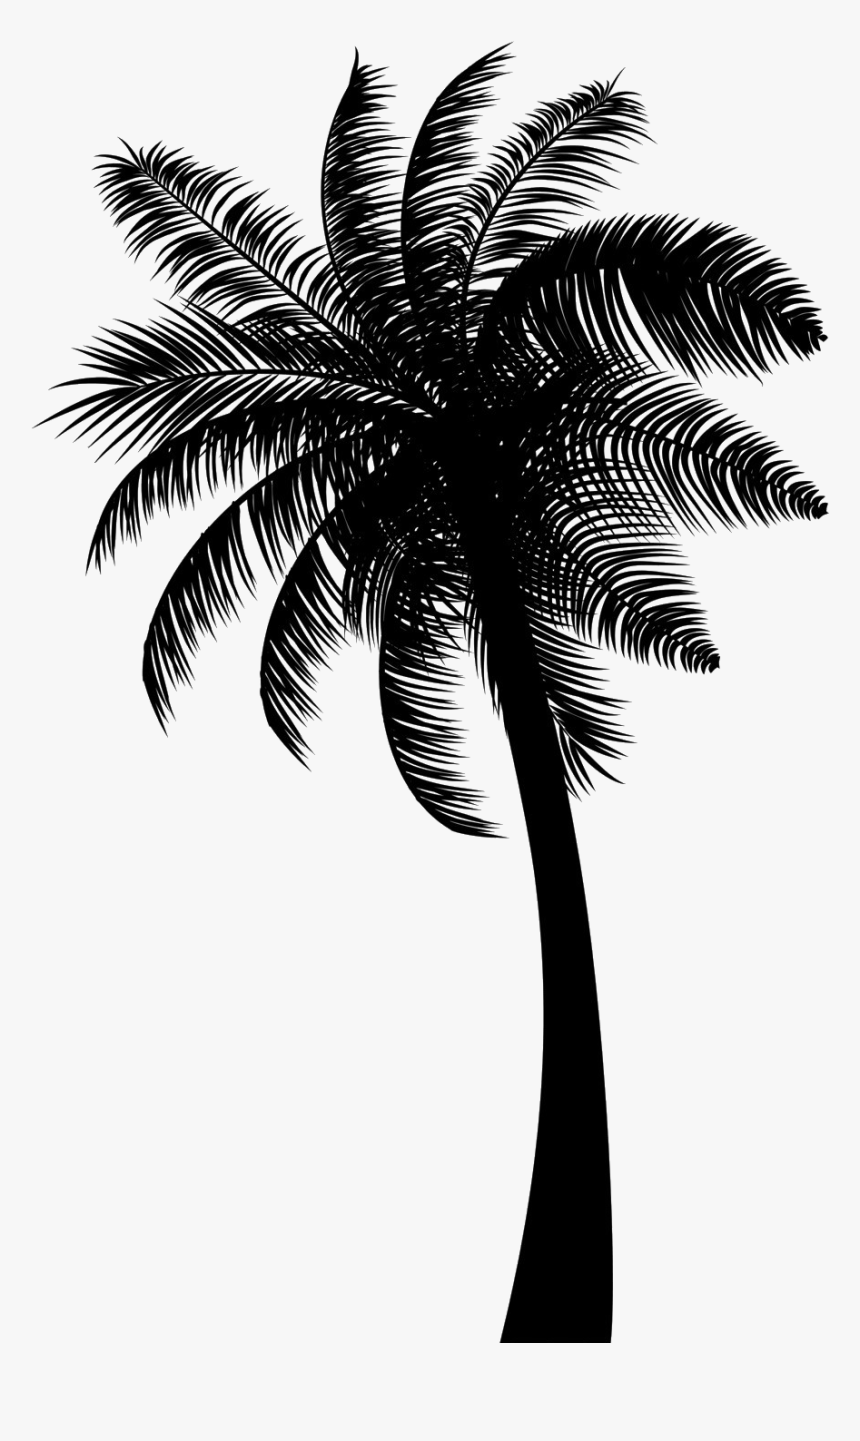 Black Coconut Tree Png Free Download - Coconut Tree Png Black ...